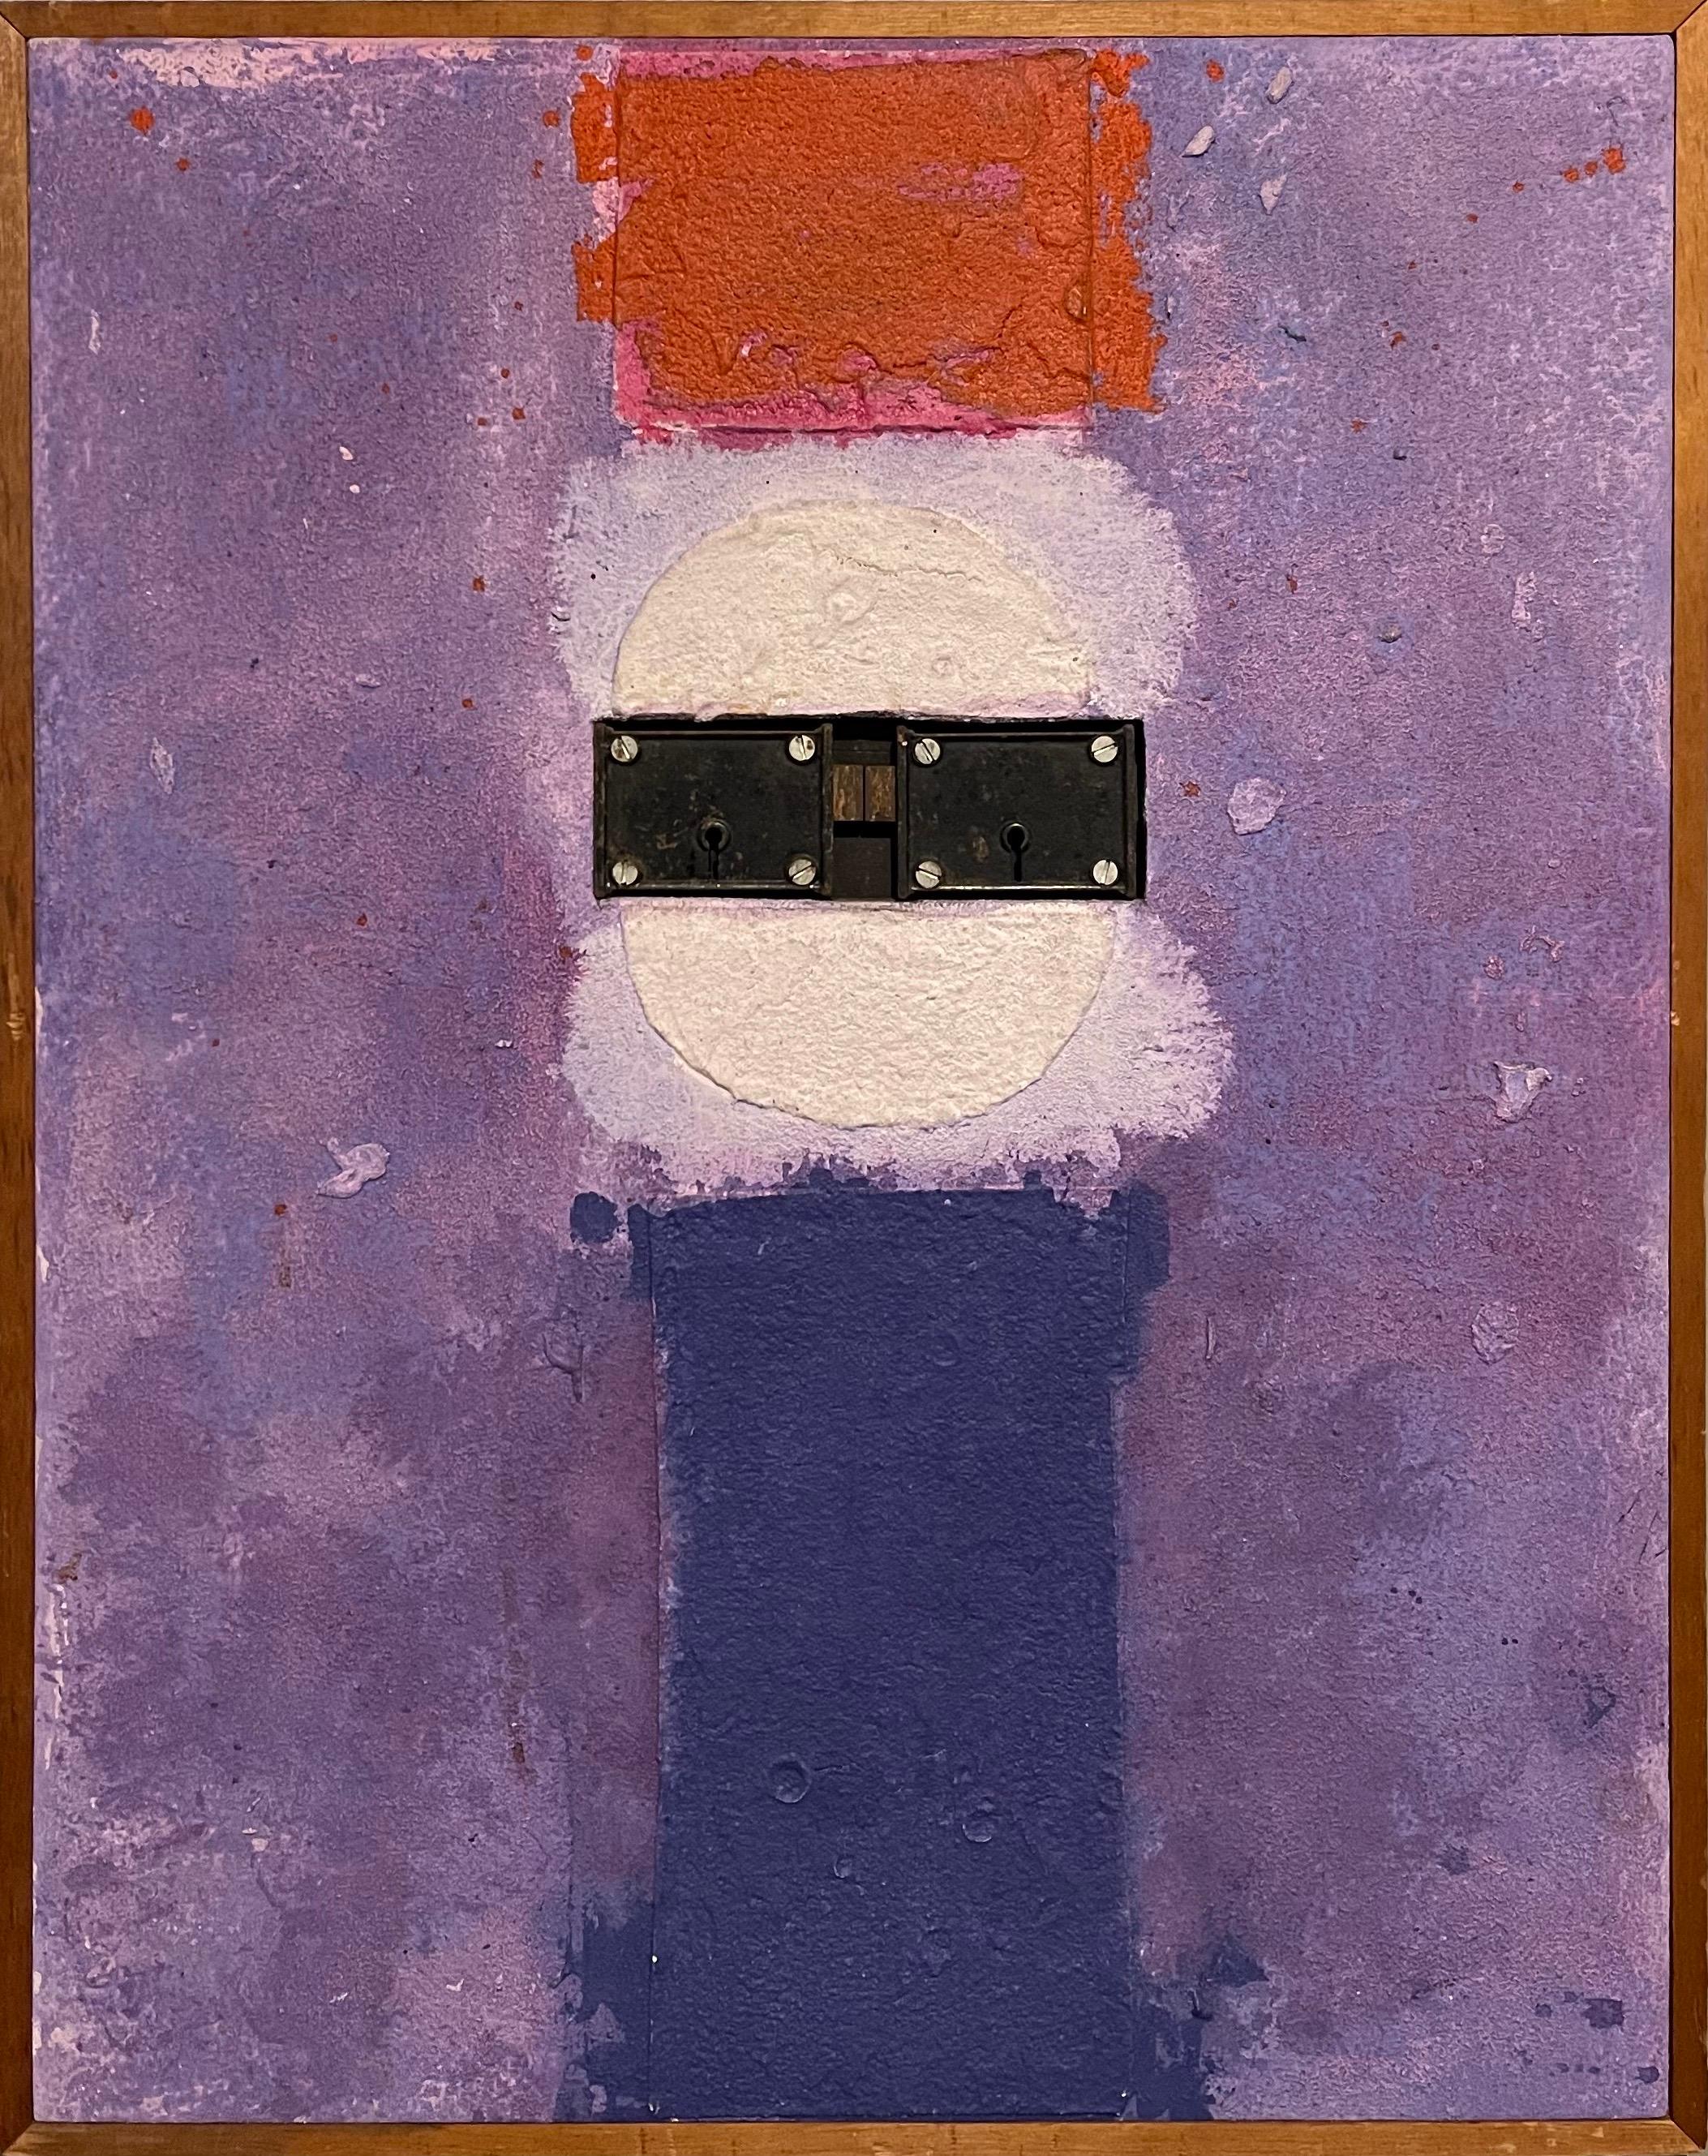 Lou Fink
The Patriot
Oil on canvas, 1970 (mixed media with iron lock)
Provenance: Collection of The Southampton Hospital Association, Southampton, New York.

This abstract expressionist painting entitled "the Patriot" is done in patriotic shades of